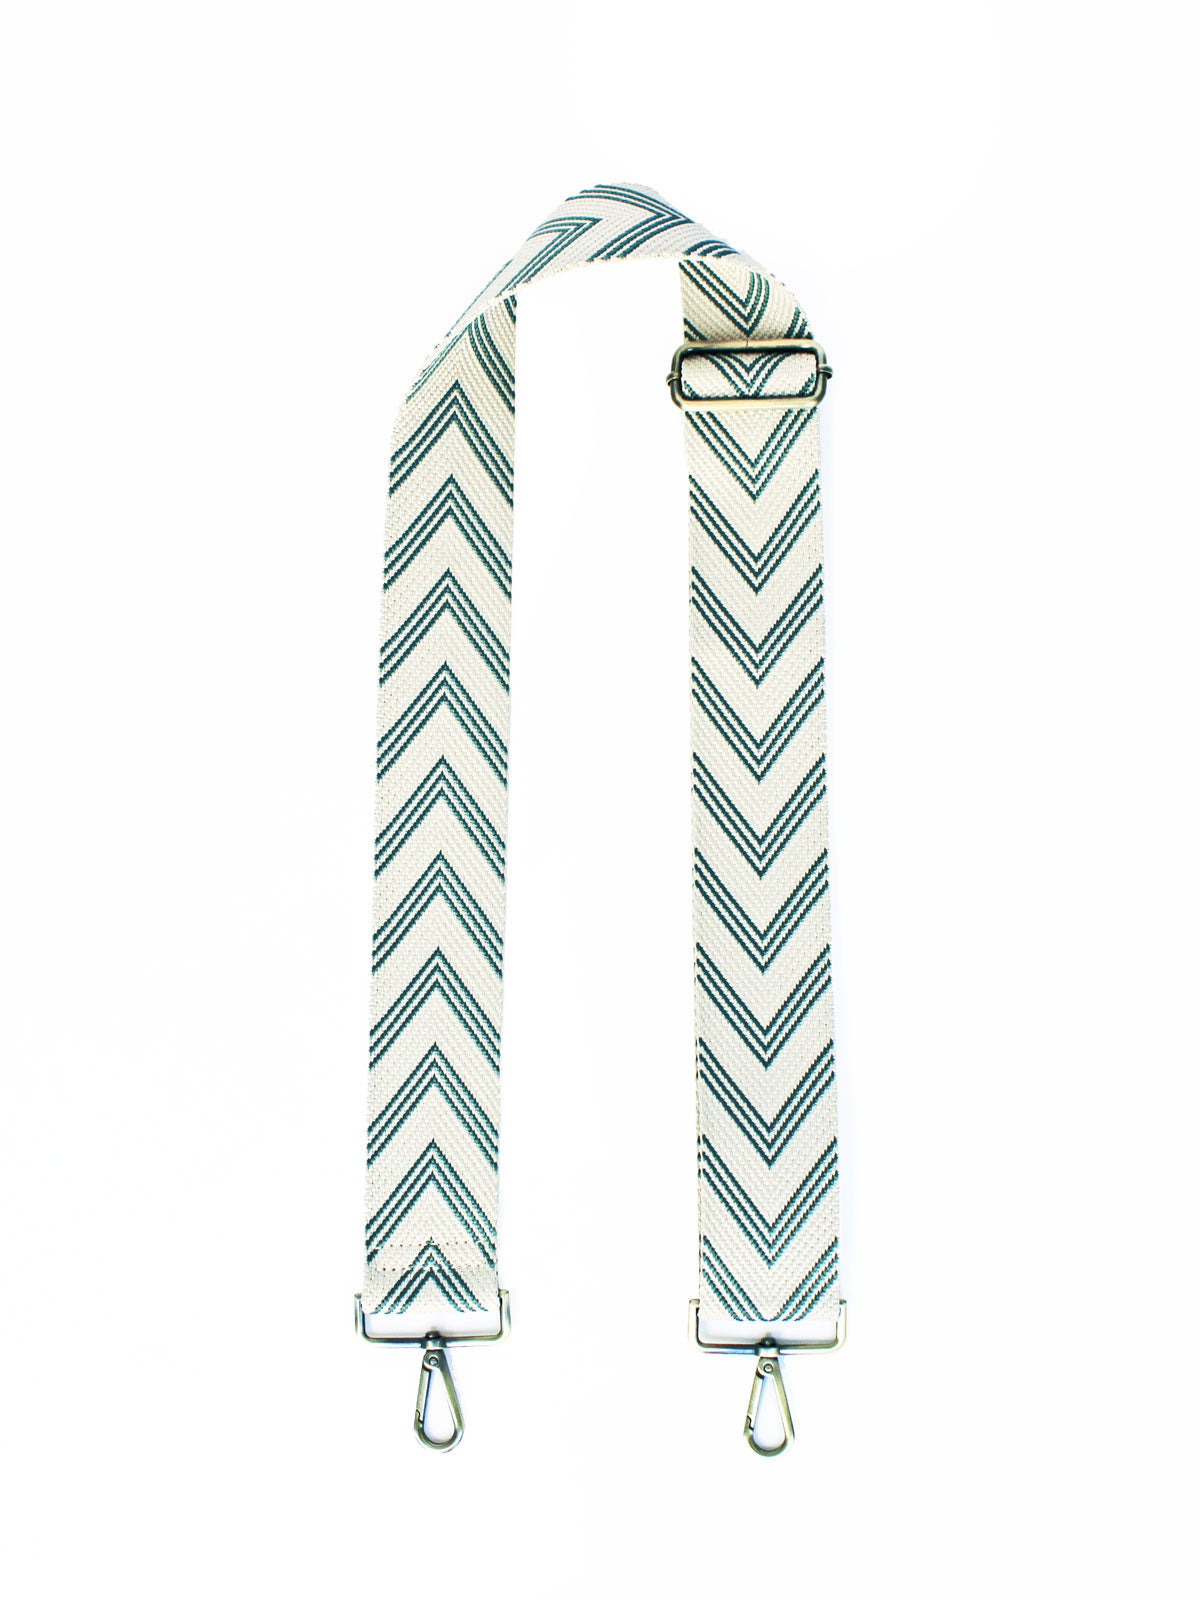 Ziggy Strap in Teal